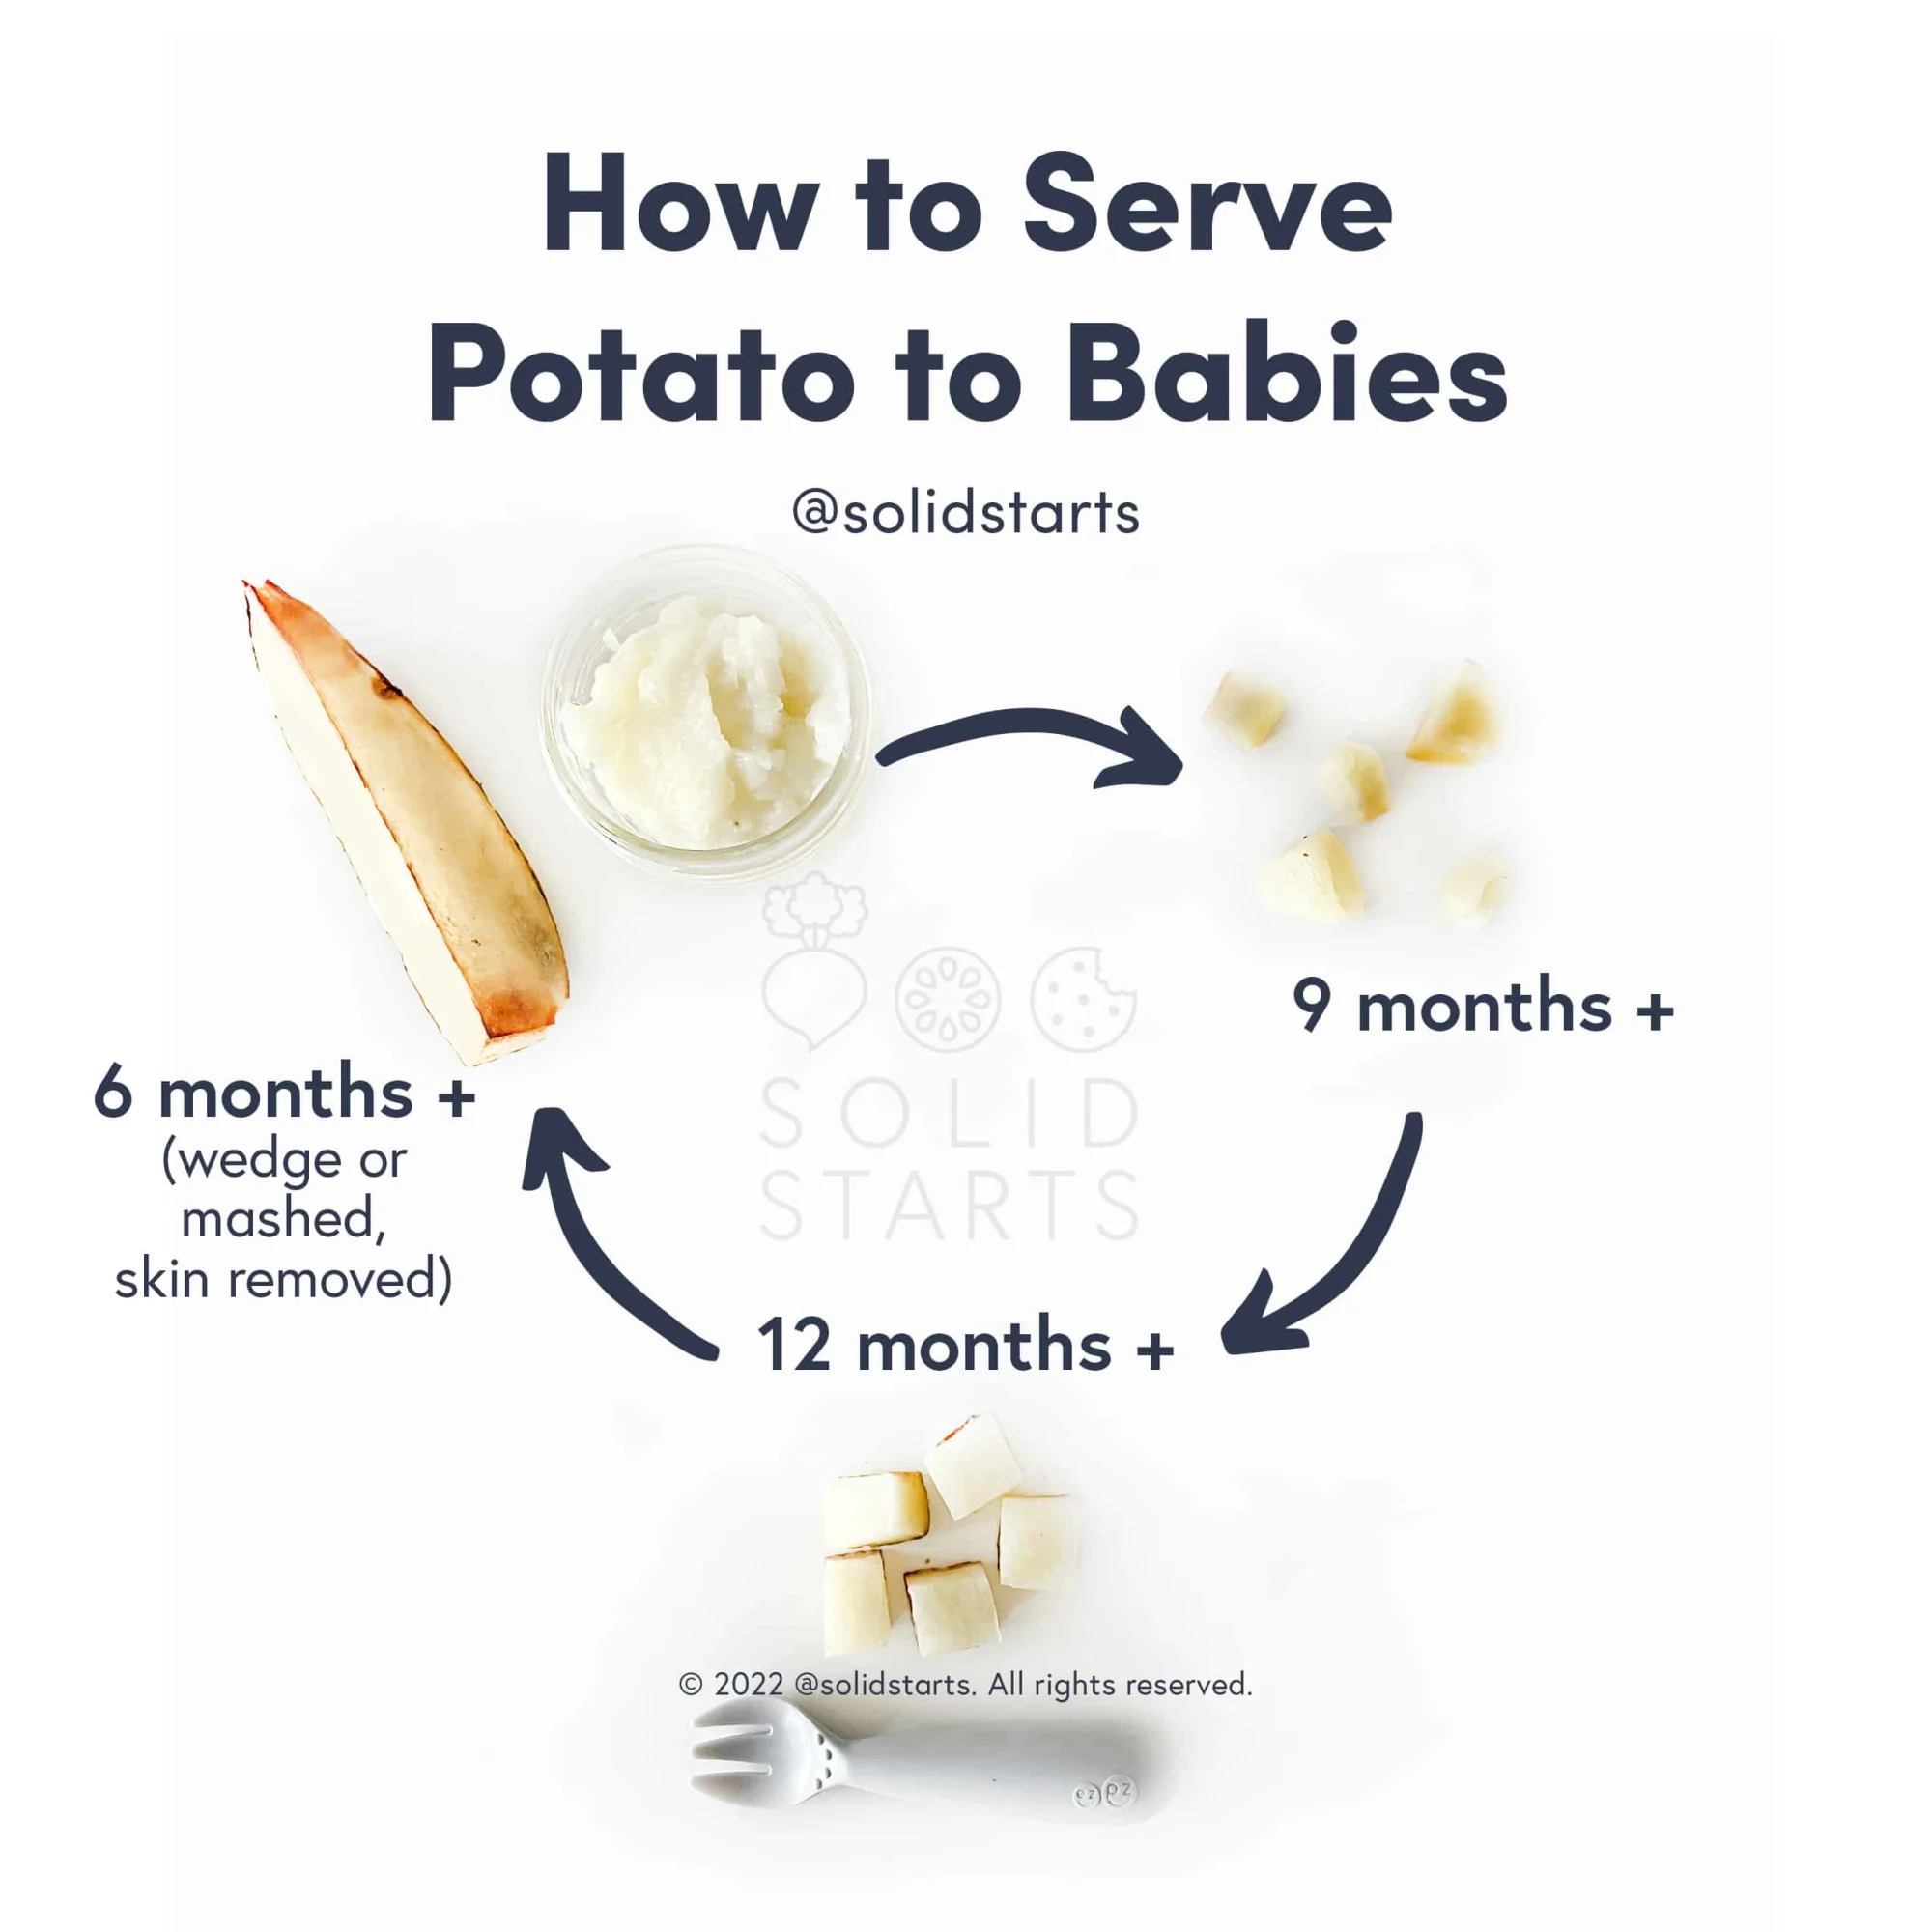 an infographic with the header "how to serve potato to babies": cooked wedges for babies 6 months+, cooked bite-size pieces for 9 months+, bite-size pieces with a fork for 12 months+